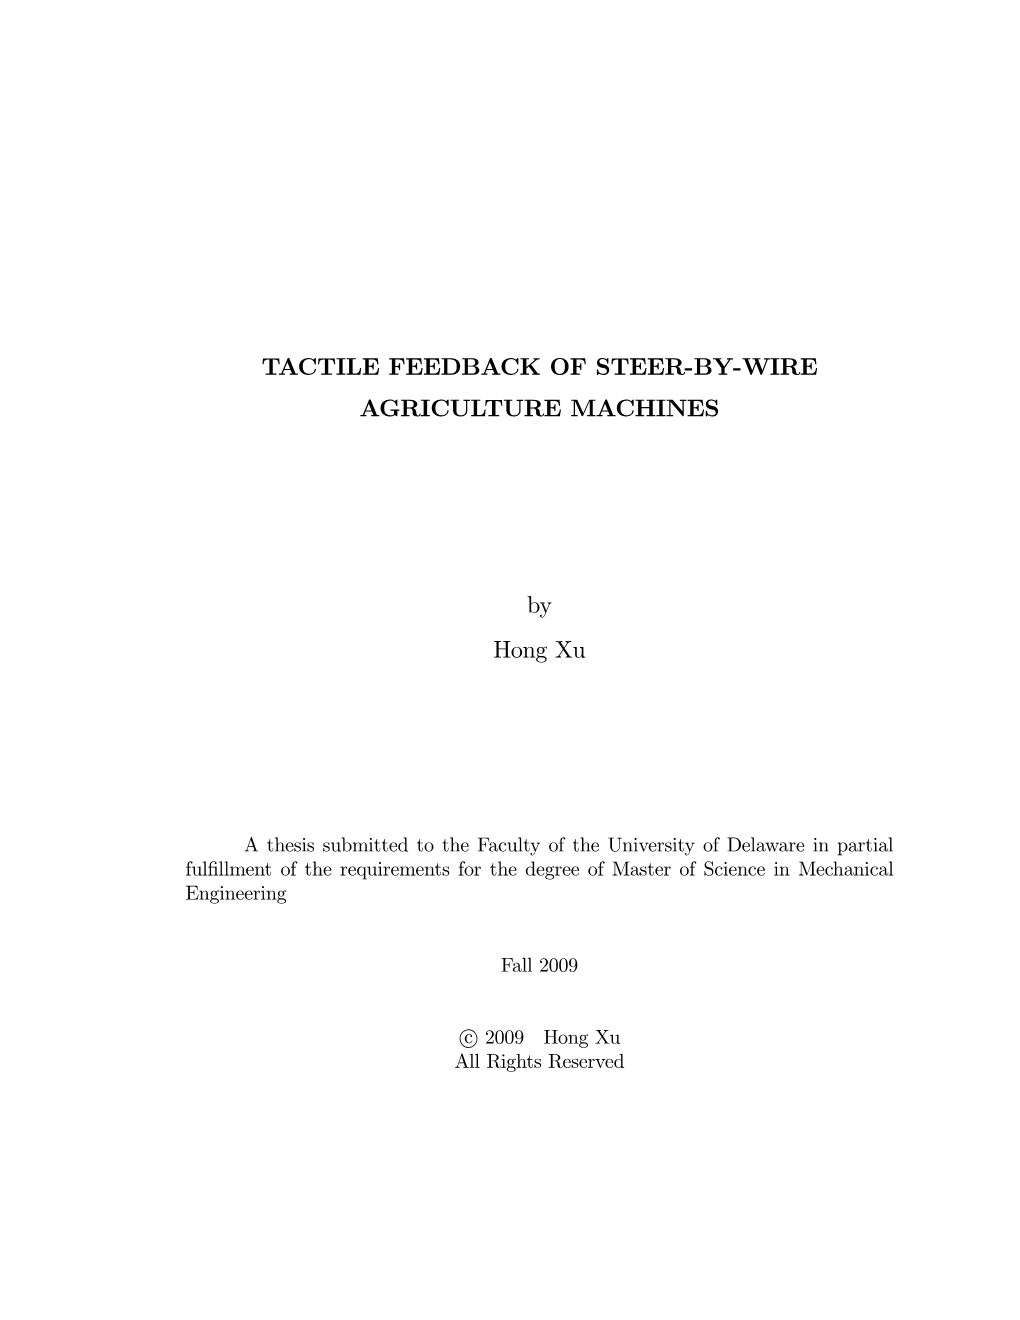 TACTILE FEEDBACK of STEER-BY-WIRE AGRICULTURE MACHINES by Hong Xu